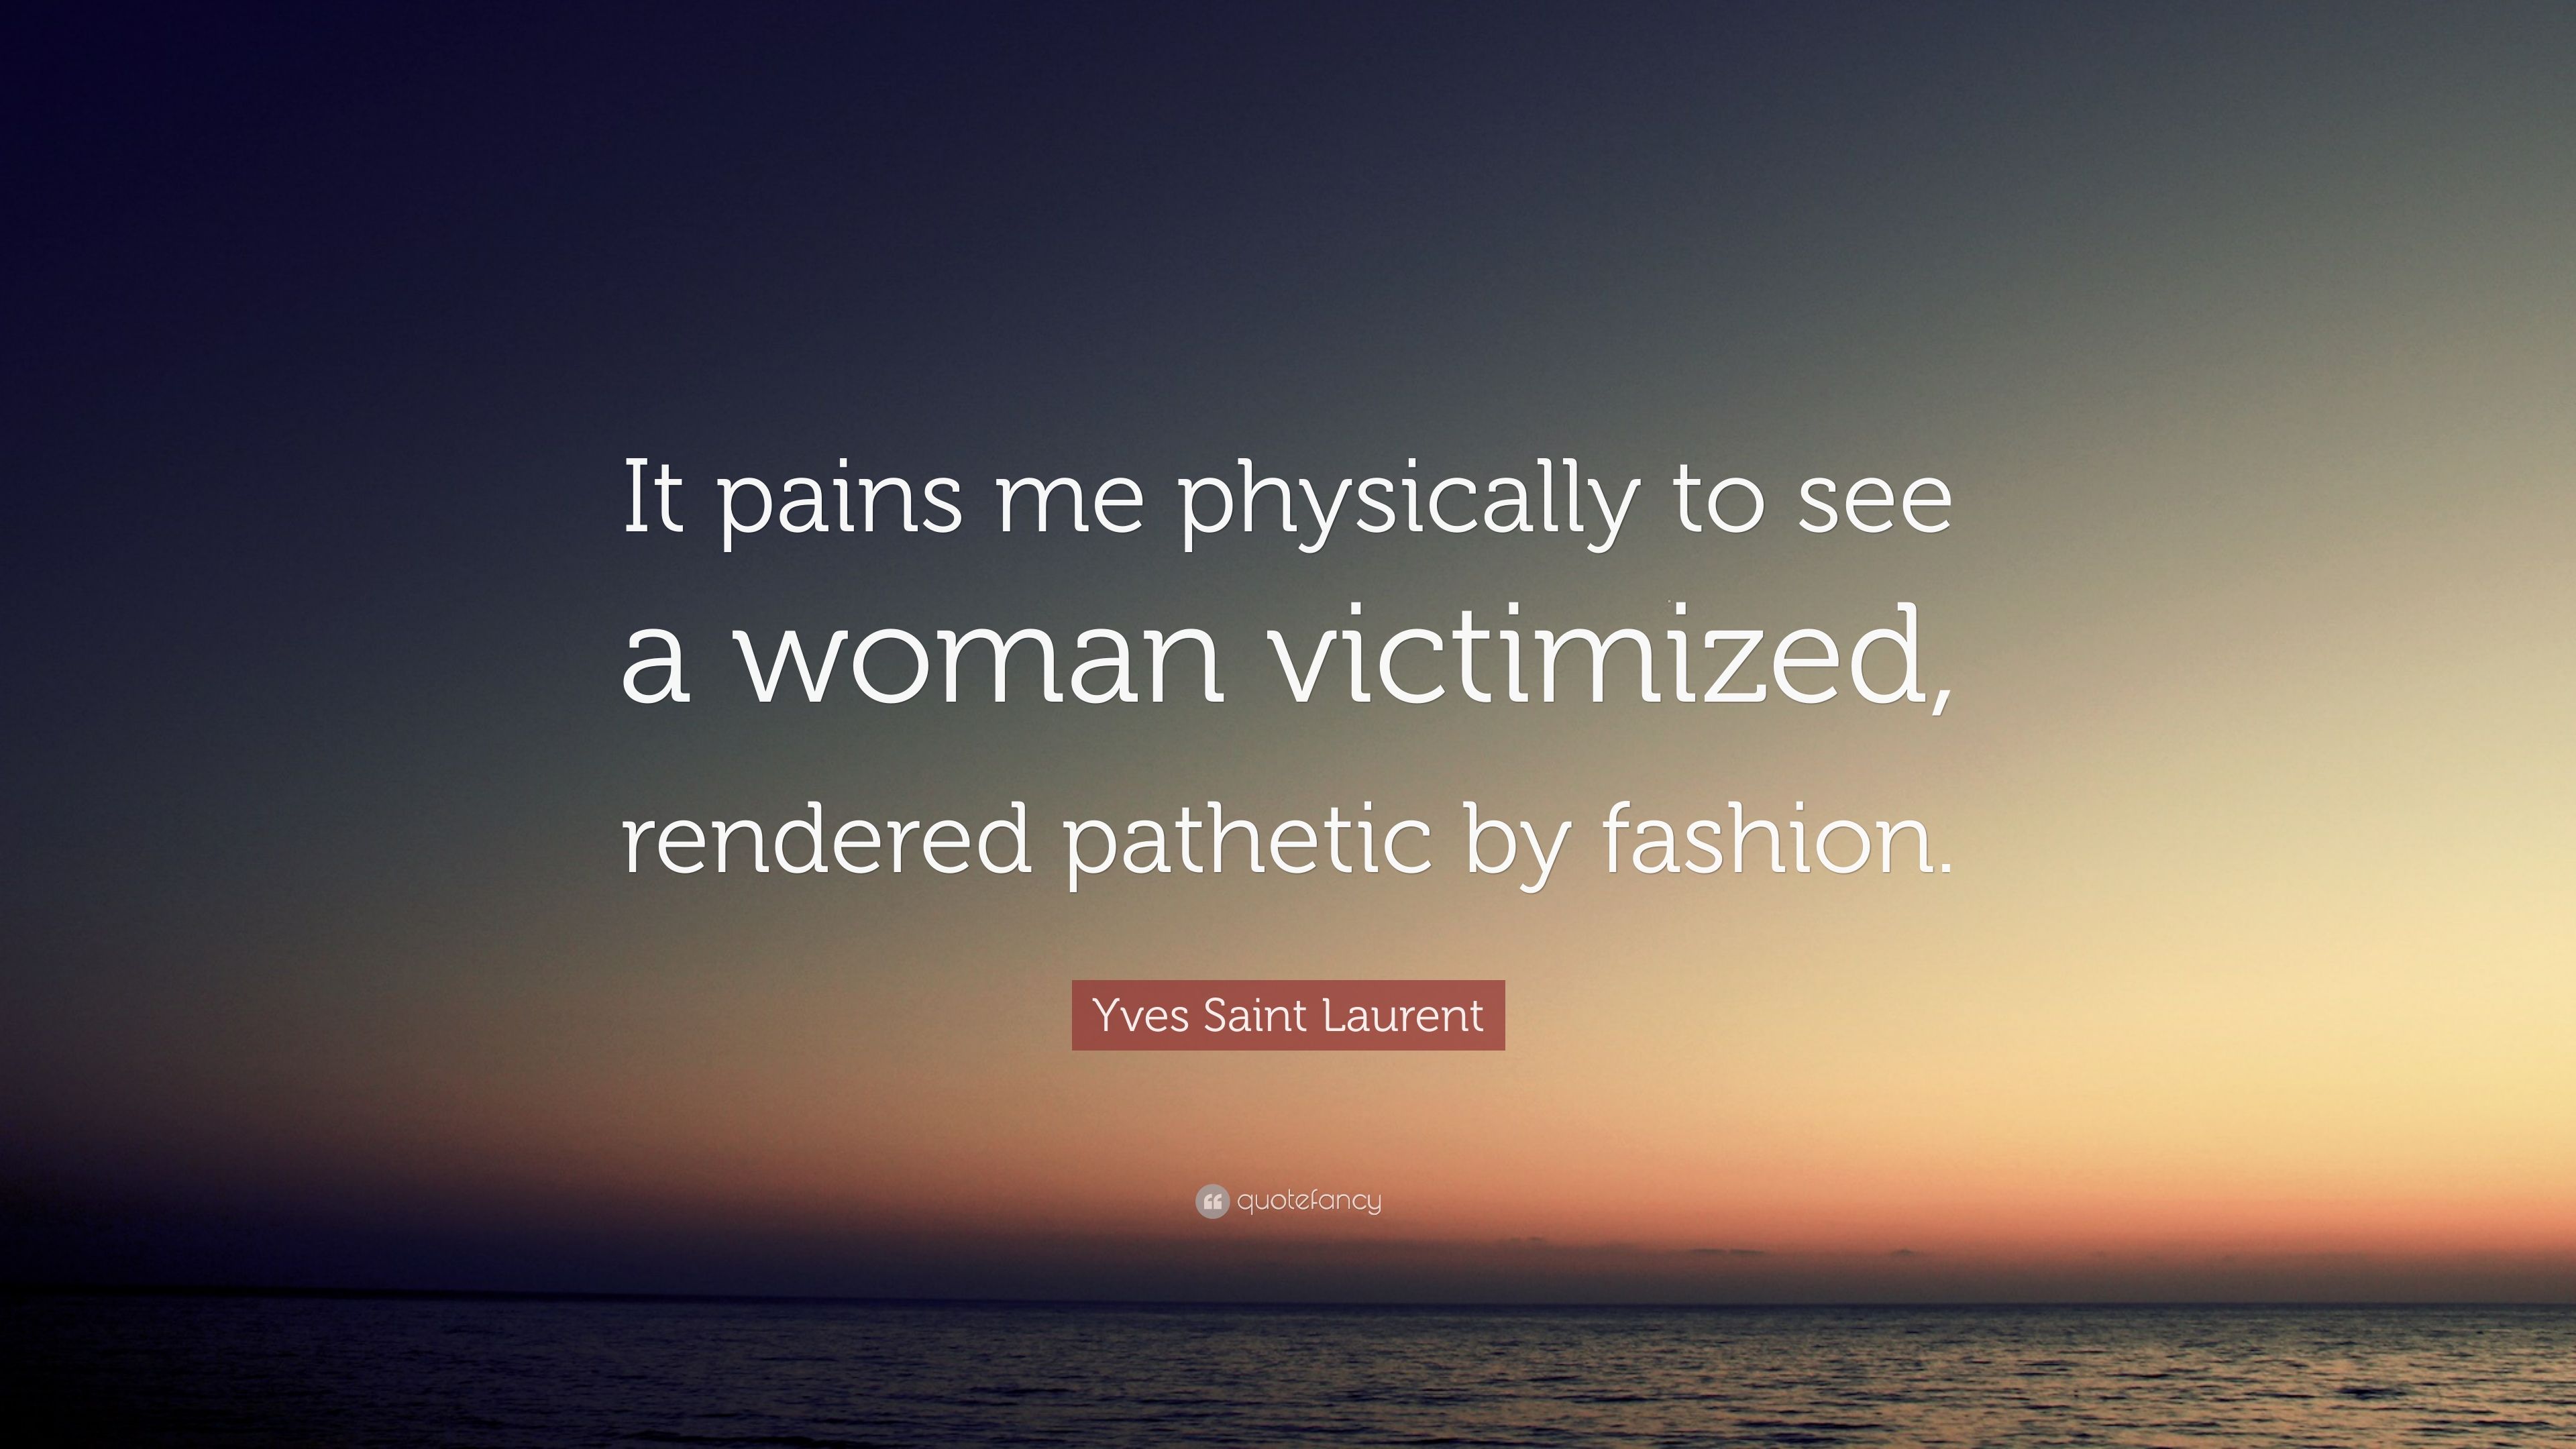 Yves Saint Laurent Quote: “It pains me physically to see a woman ...